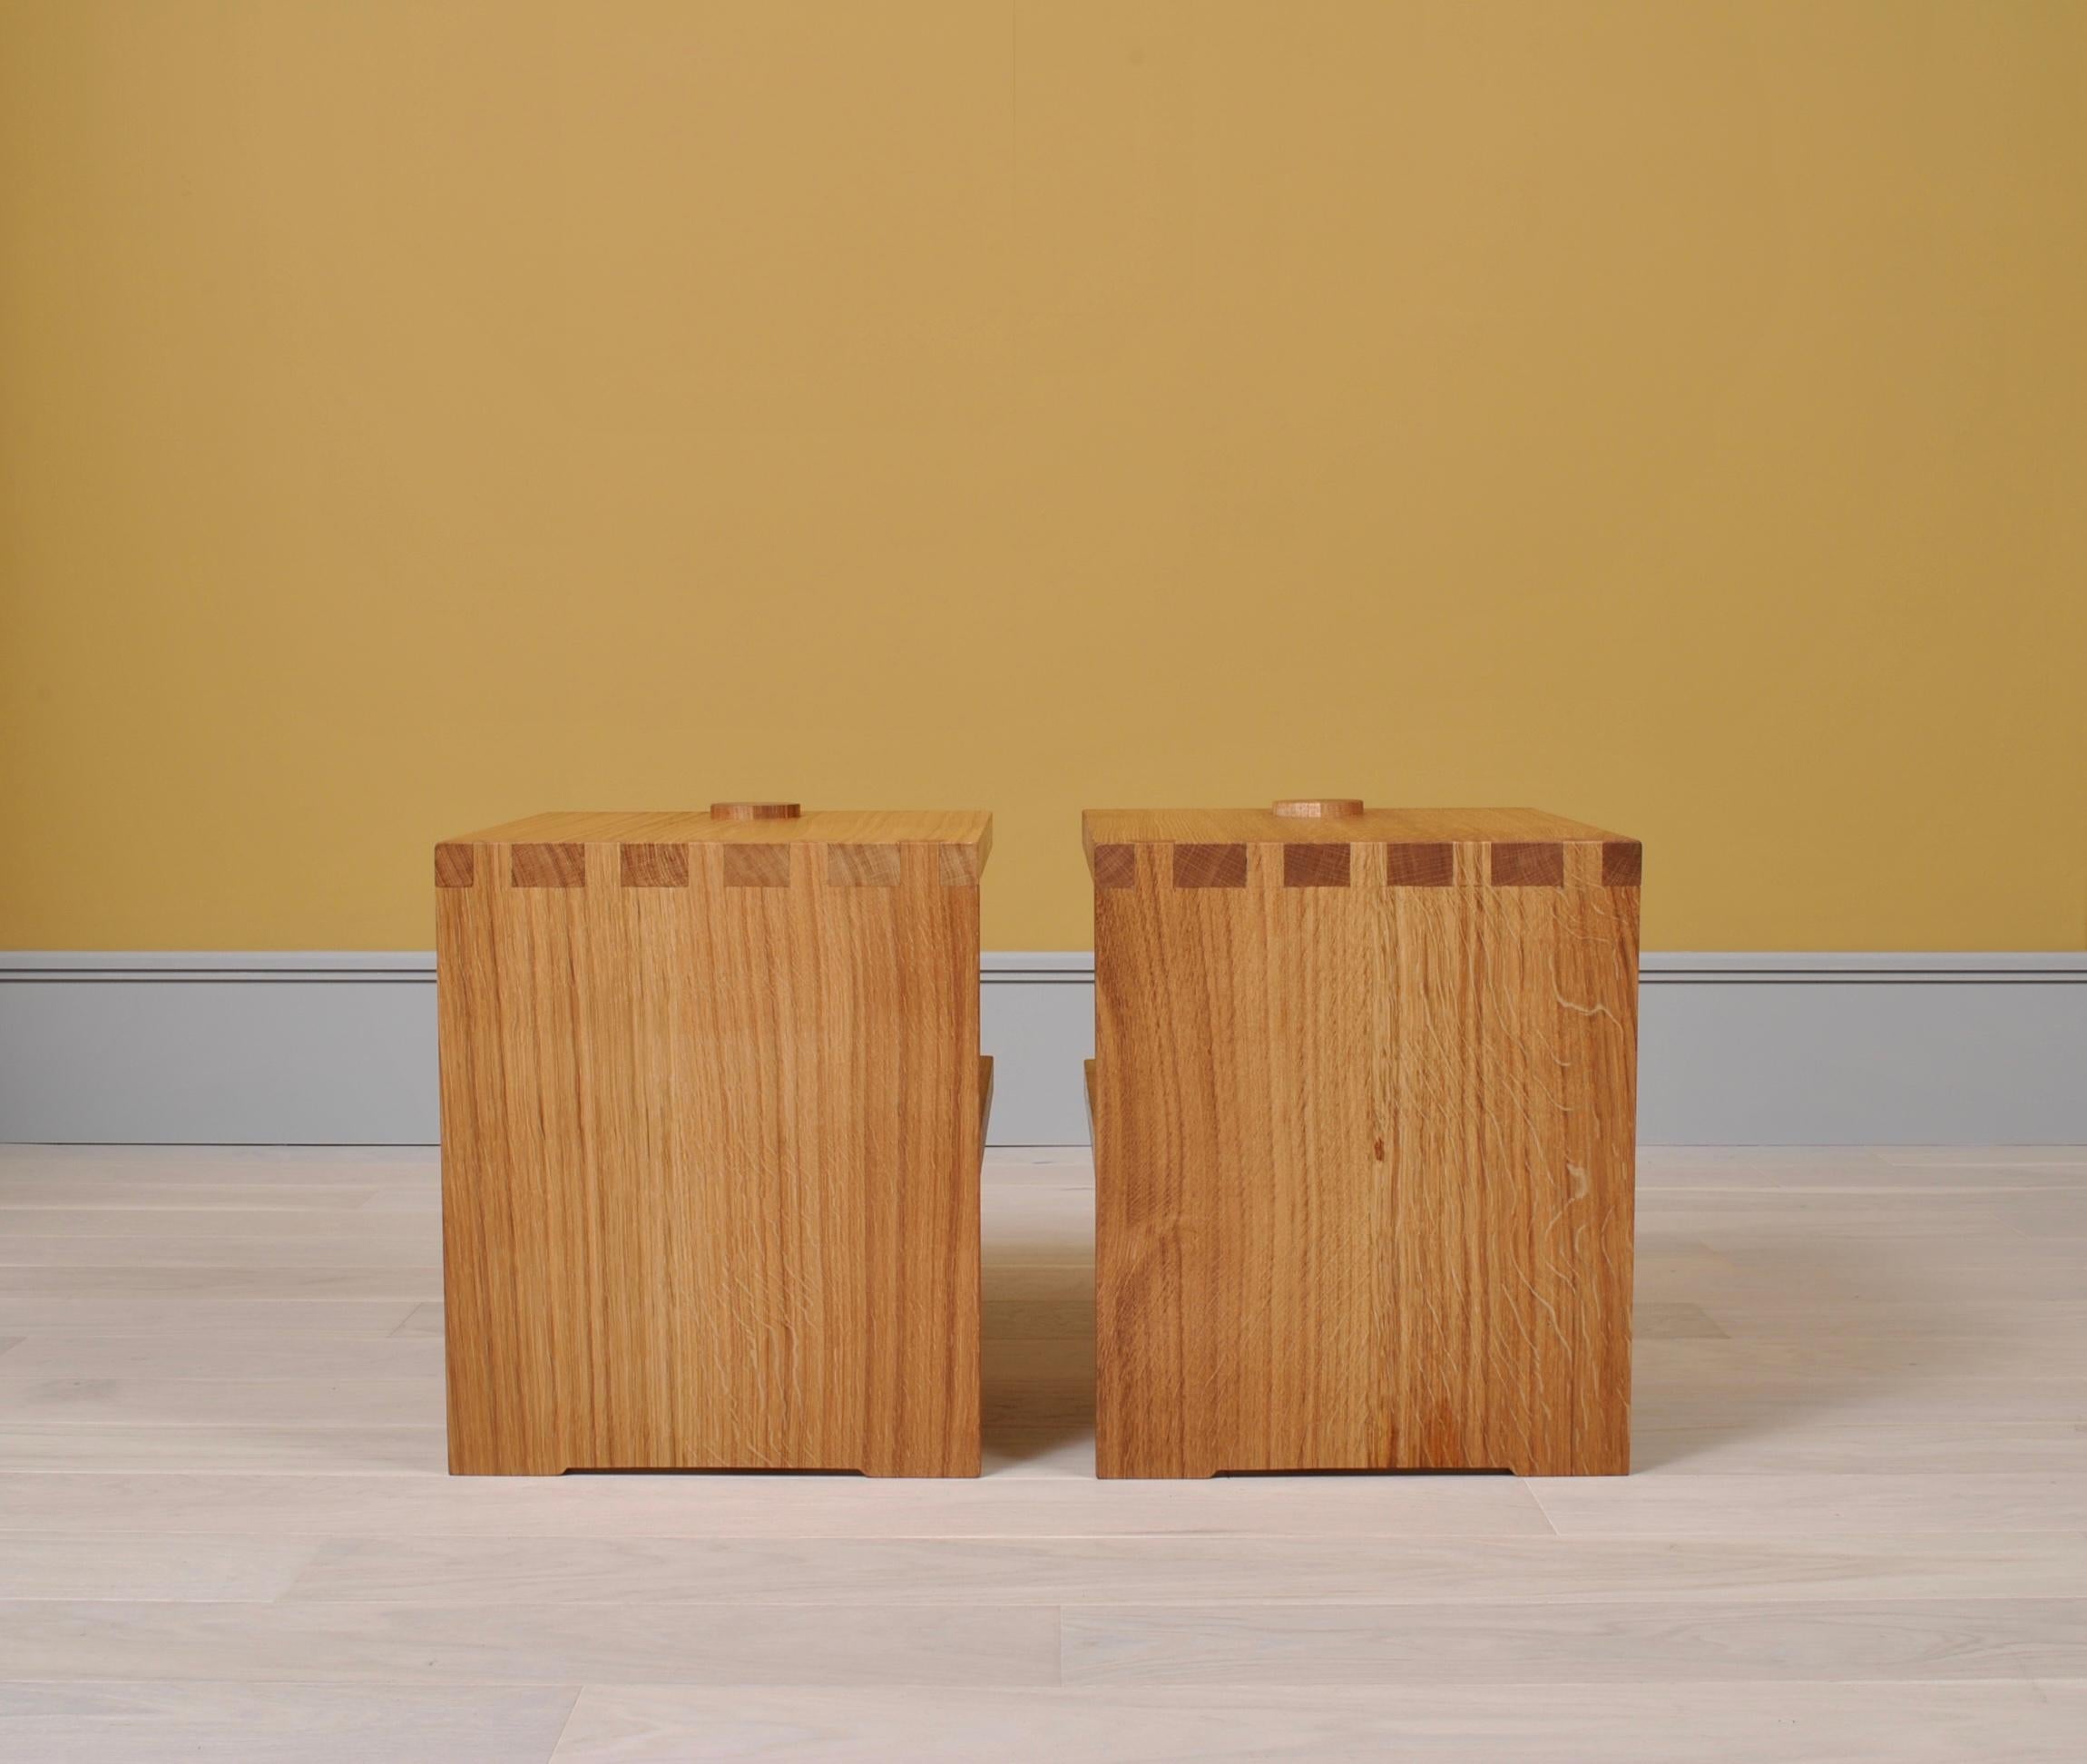 English Pair of Handcrafted Architectural Oak Stools